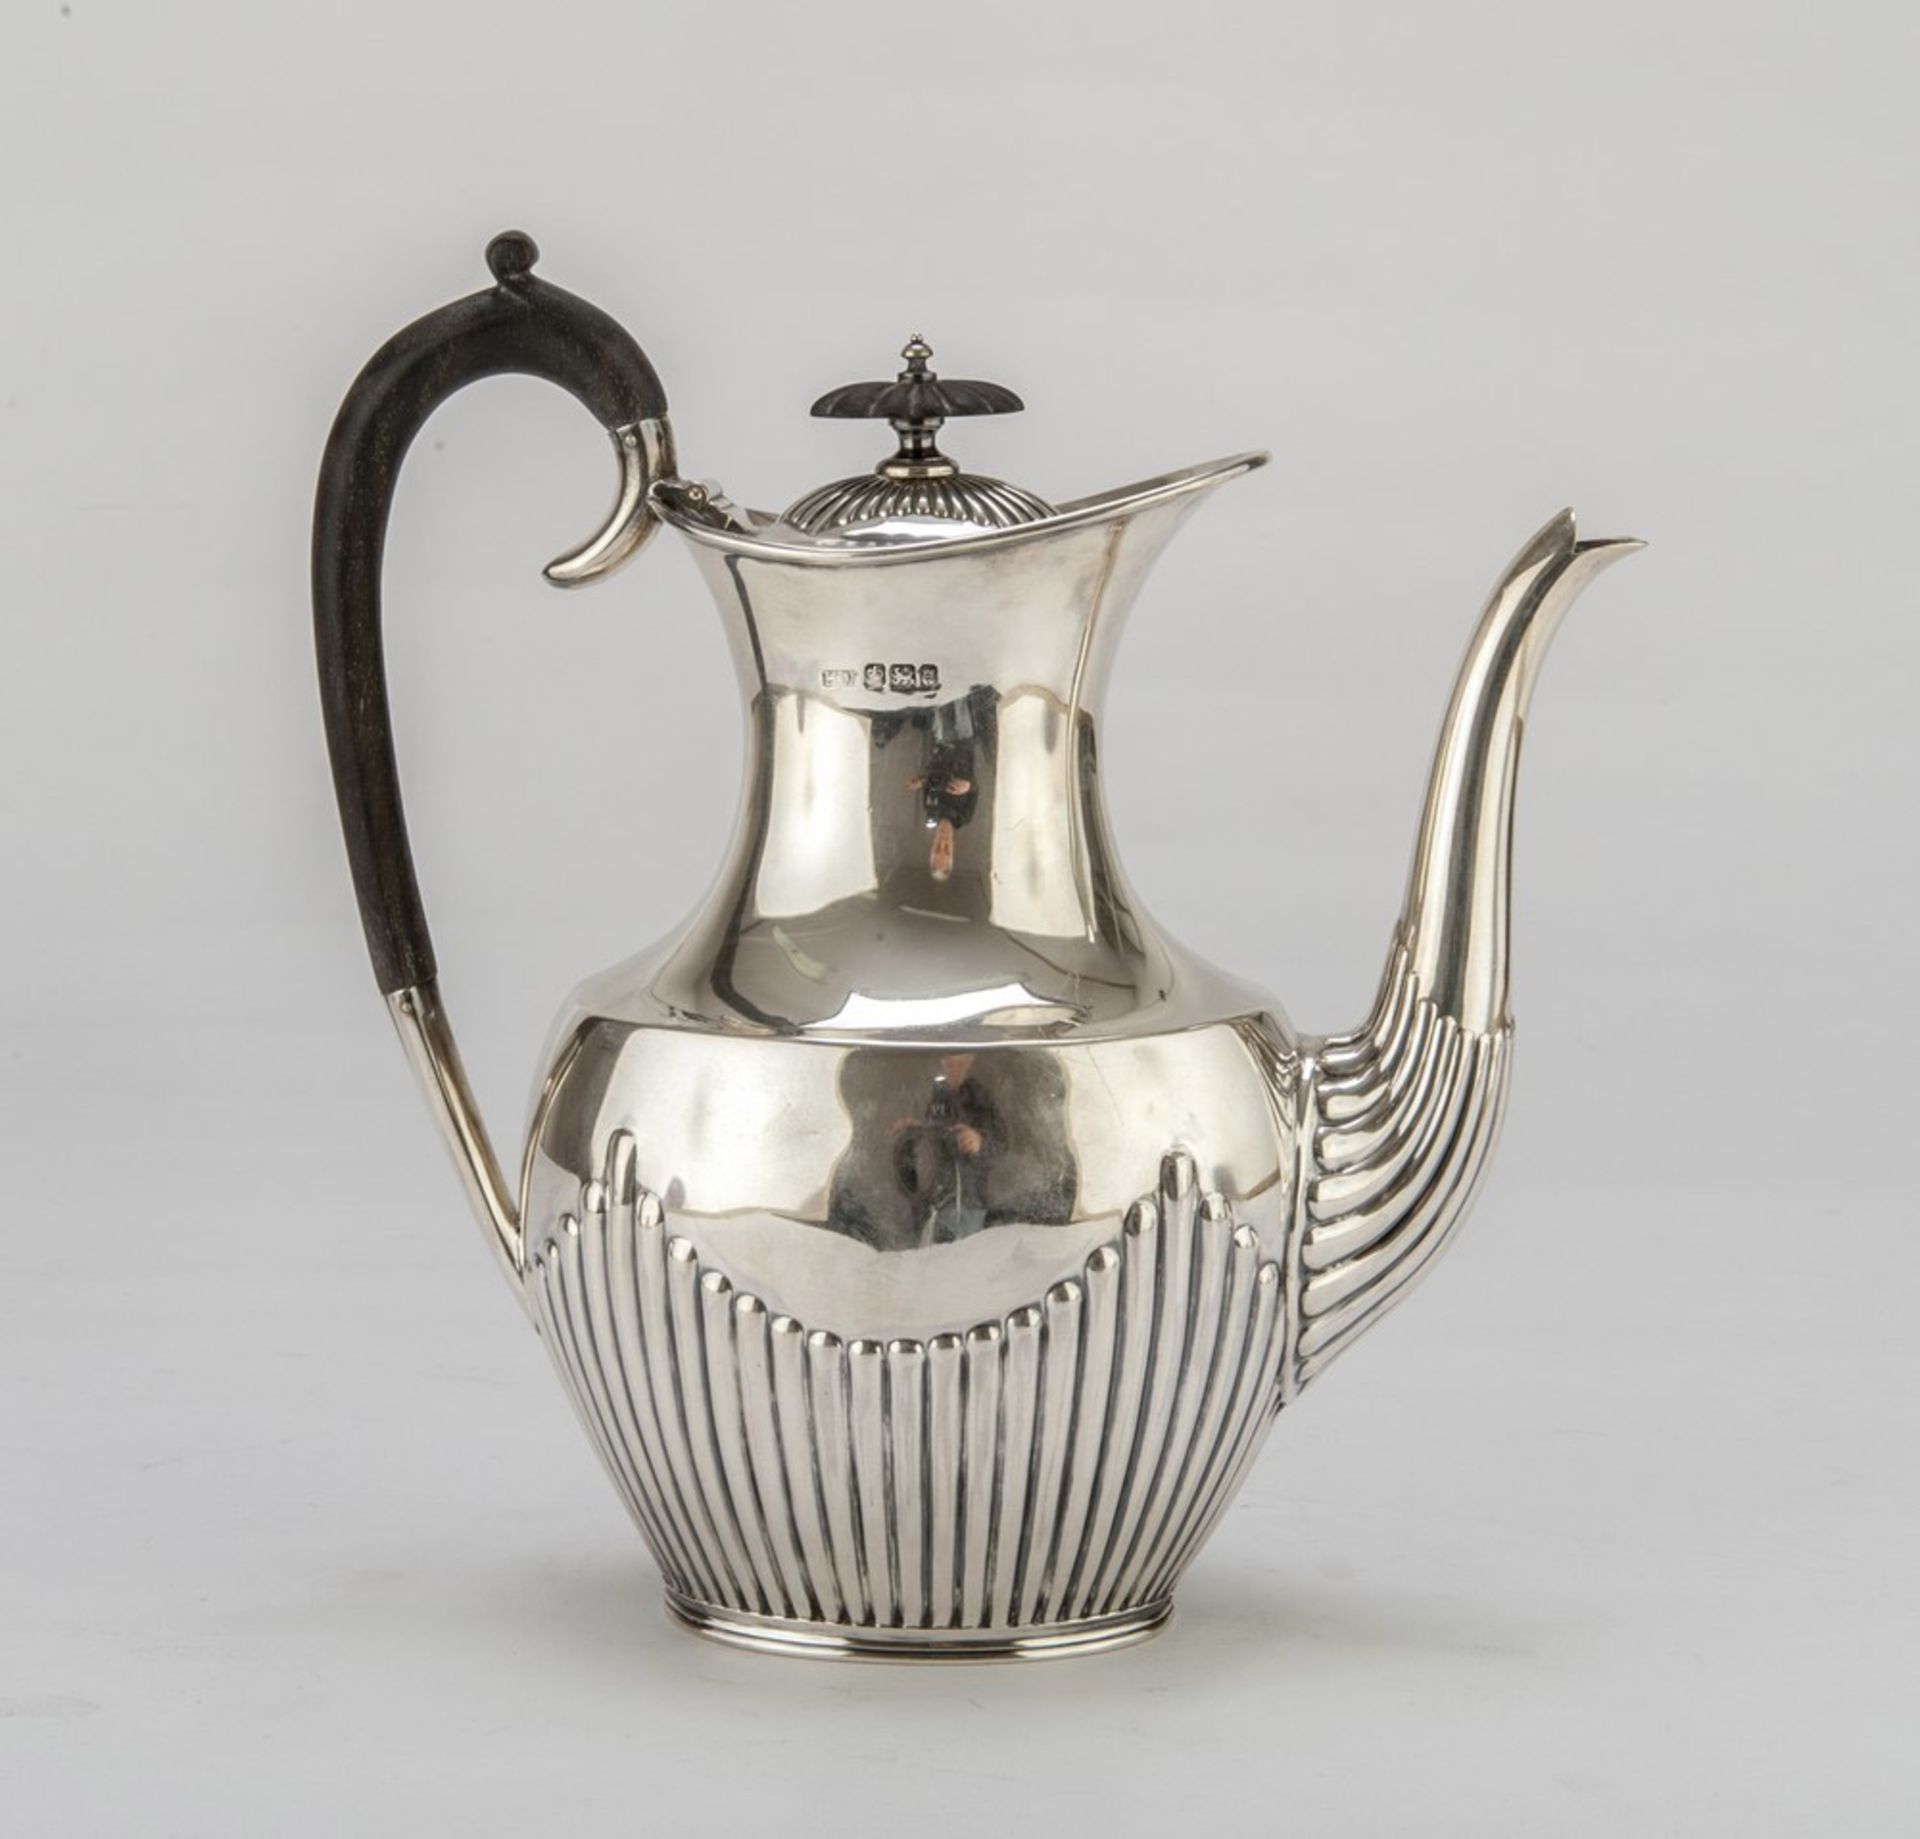 Silver Teapot, Punch SHEFFIELD 1893 fluted body, handle in ebonized woods. Silversmith H. W.